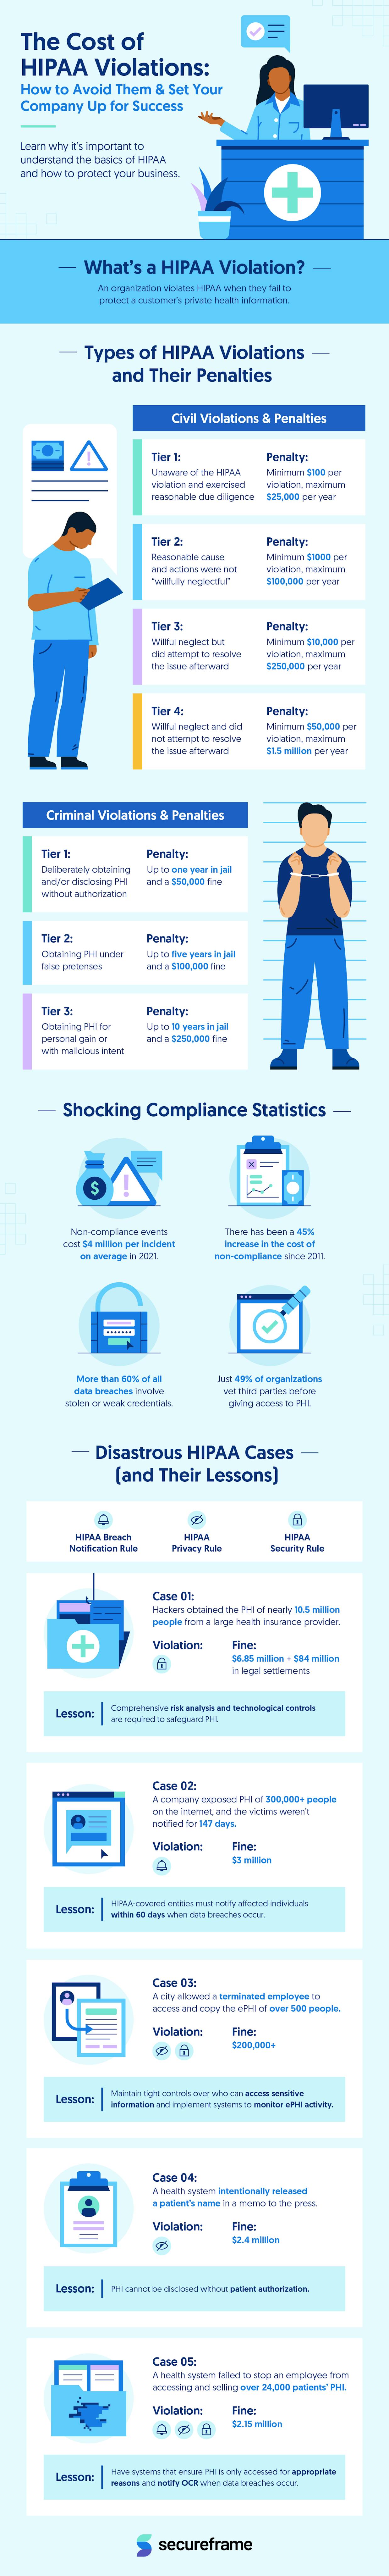 Understanding why they happened can help you safeguard your own practice and build your own plan in regard to how to prevent HIPAA violations